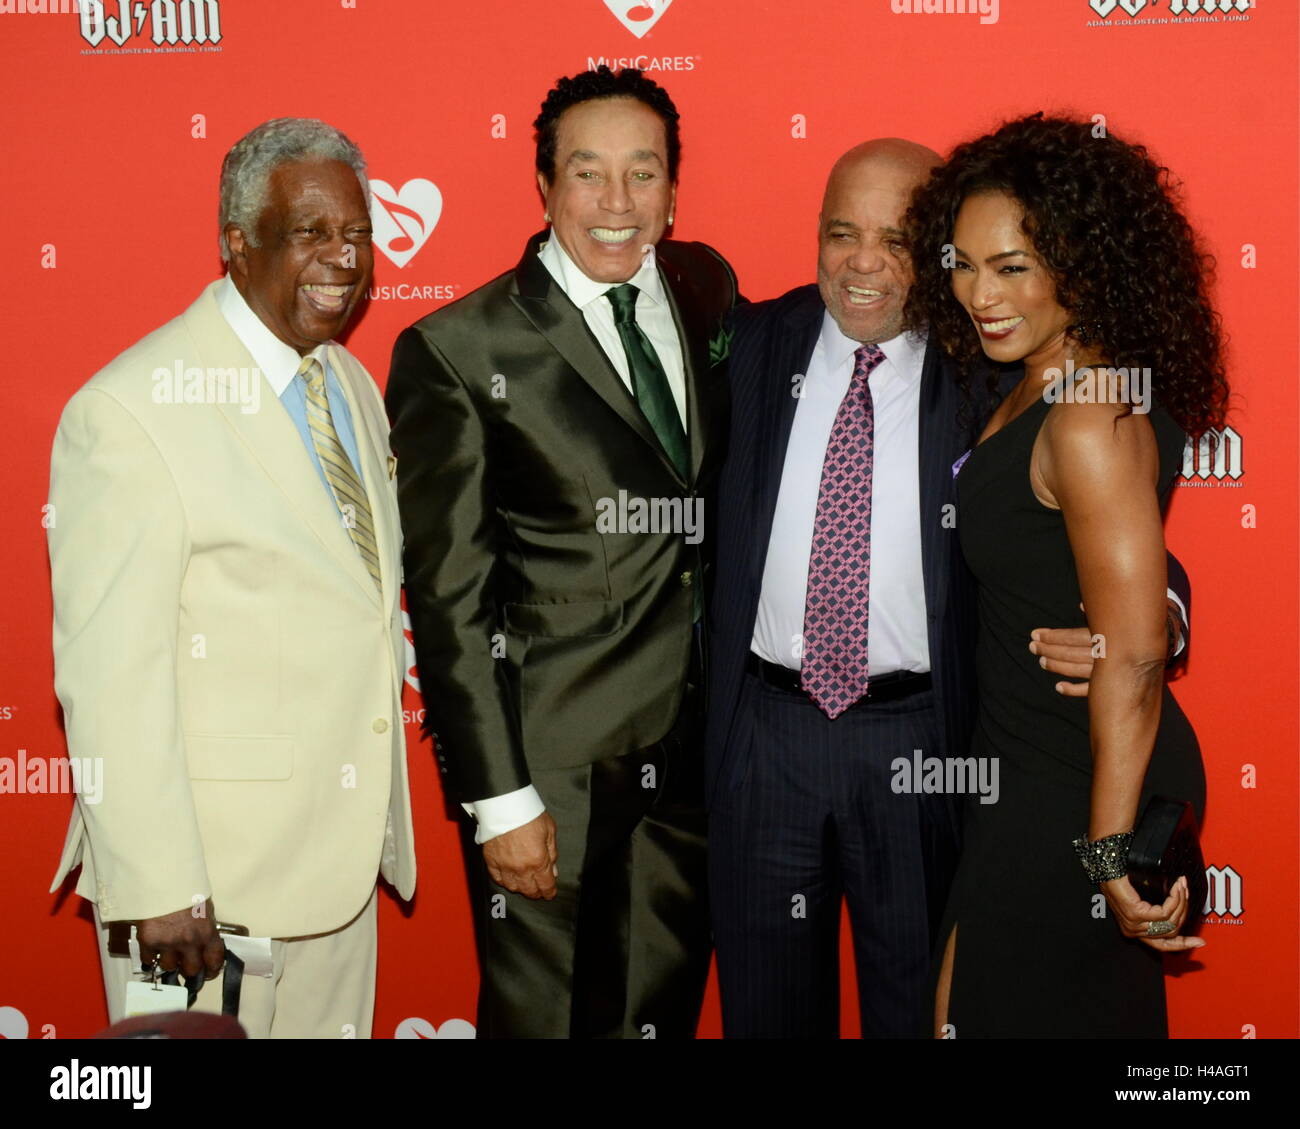 William 'Mickey' Stevenson, Smokey Robinson, Barry Gordy and Angela Bassett arrives for the 12th Annual MusiCares MAP Fund Tribute Concert at The Novo by Microsoft on May 19, 2016 in Los Angeles, California. Stock Photo